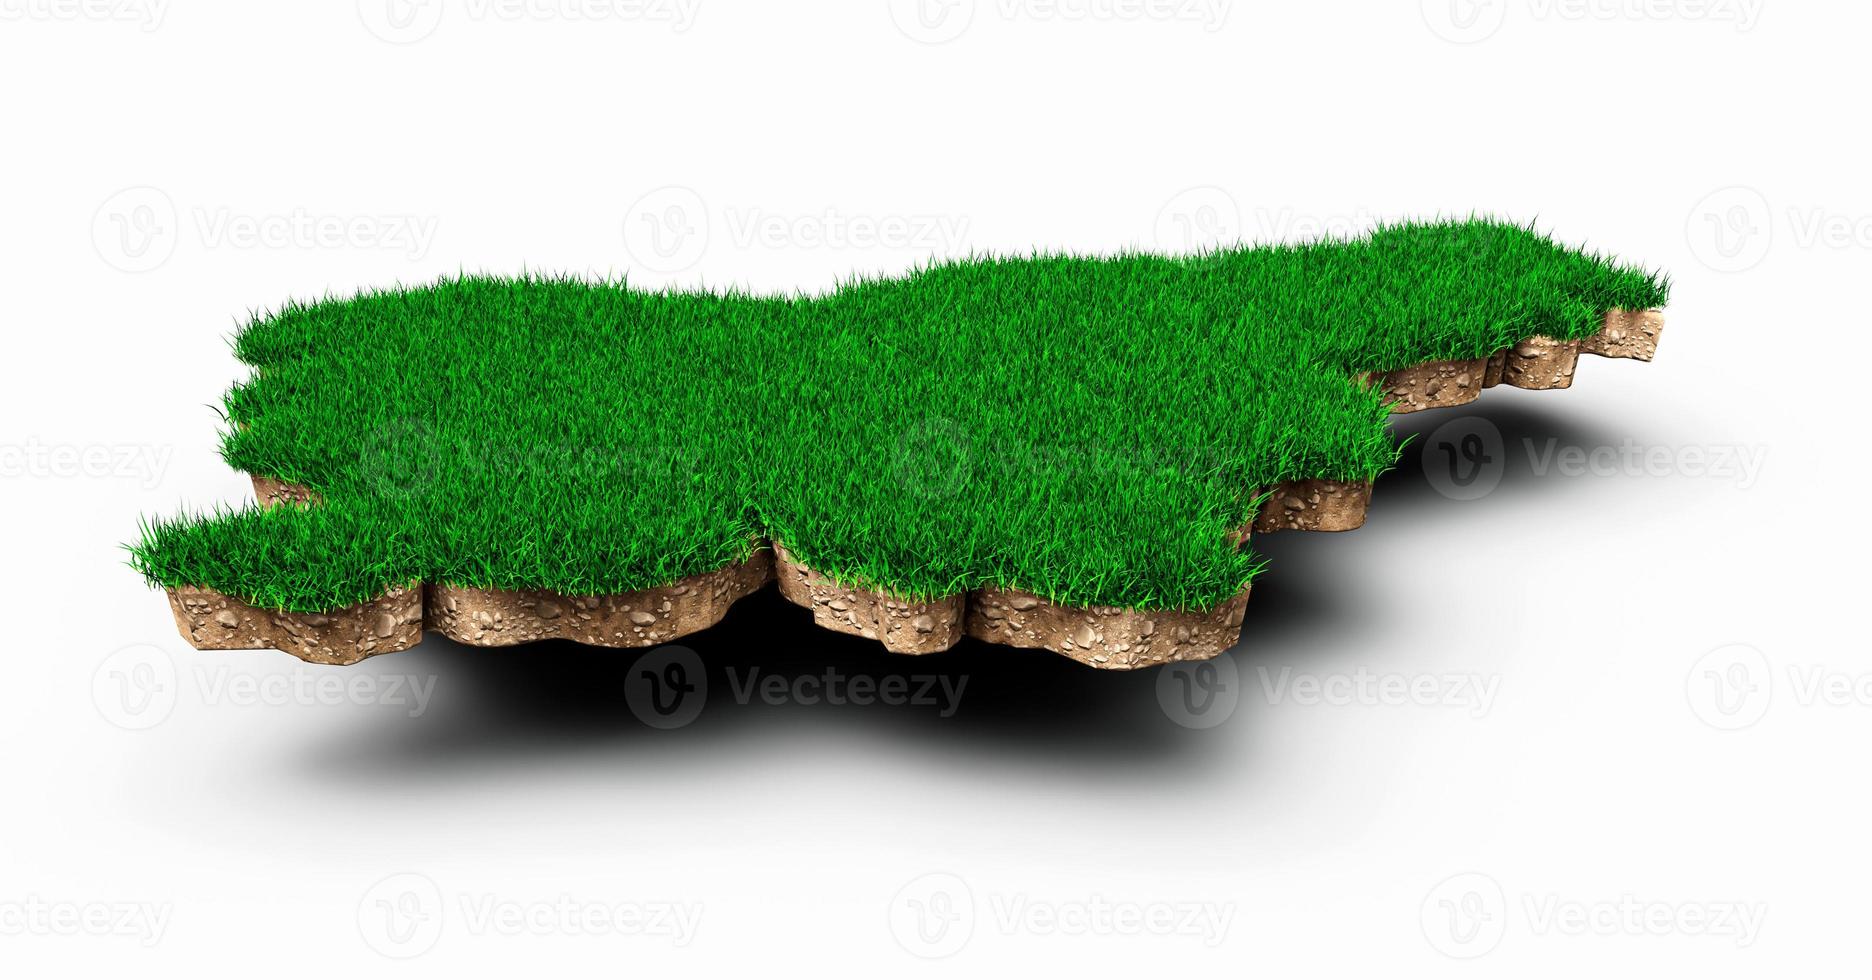 Slovenia Map soil land geology cross section with green grass and Rock ground texture 3d illustration photo